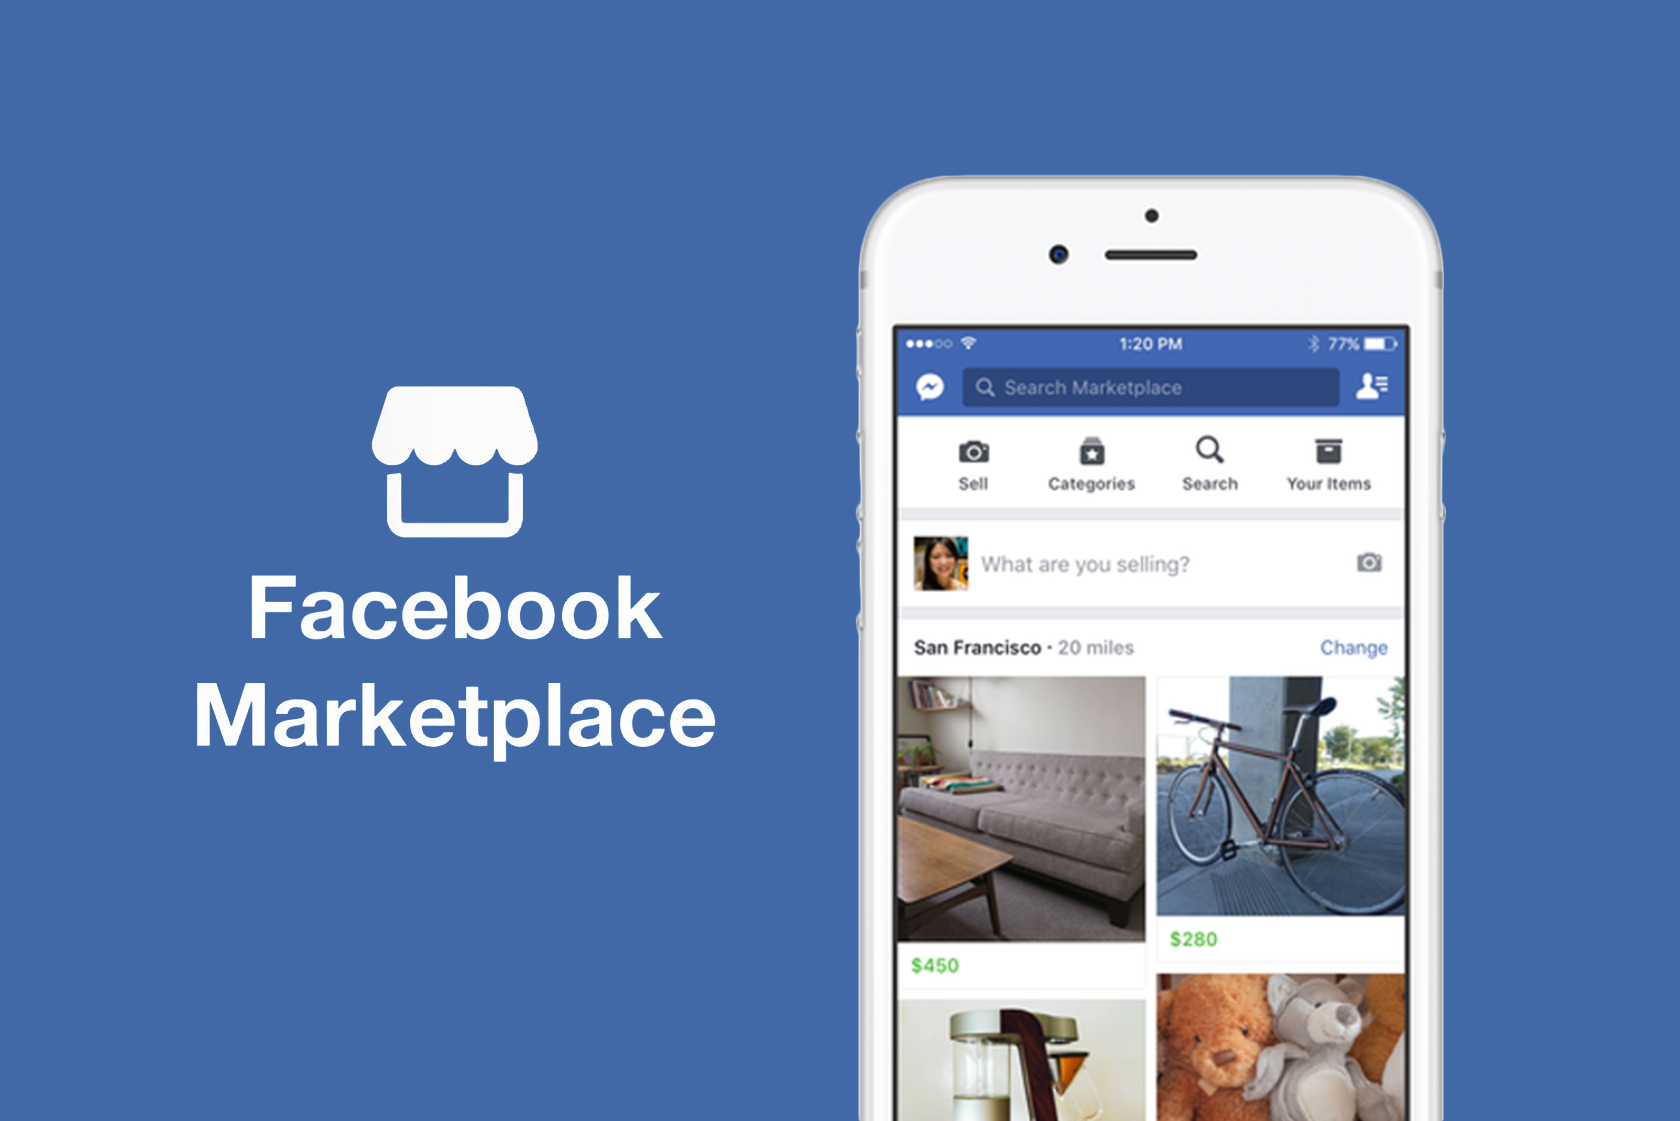 Facebook-Marketplace App For Buying And Selling